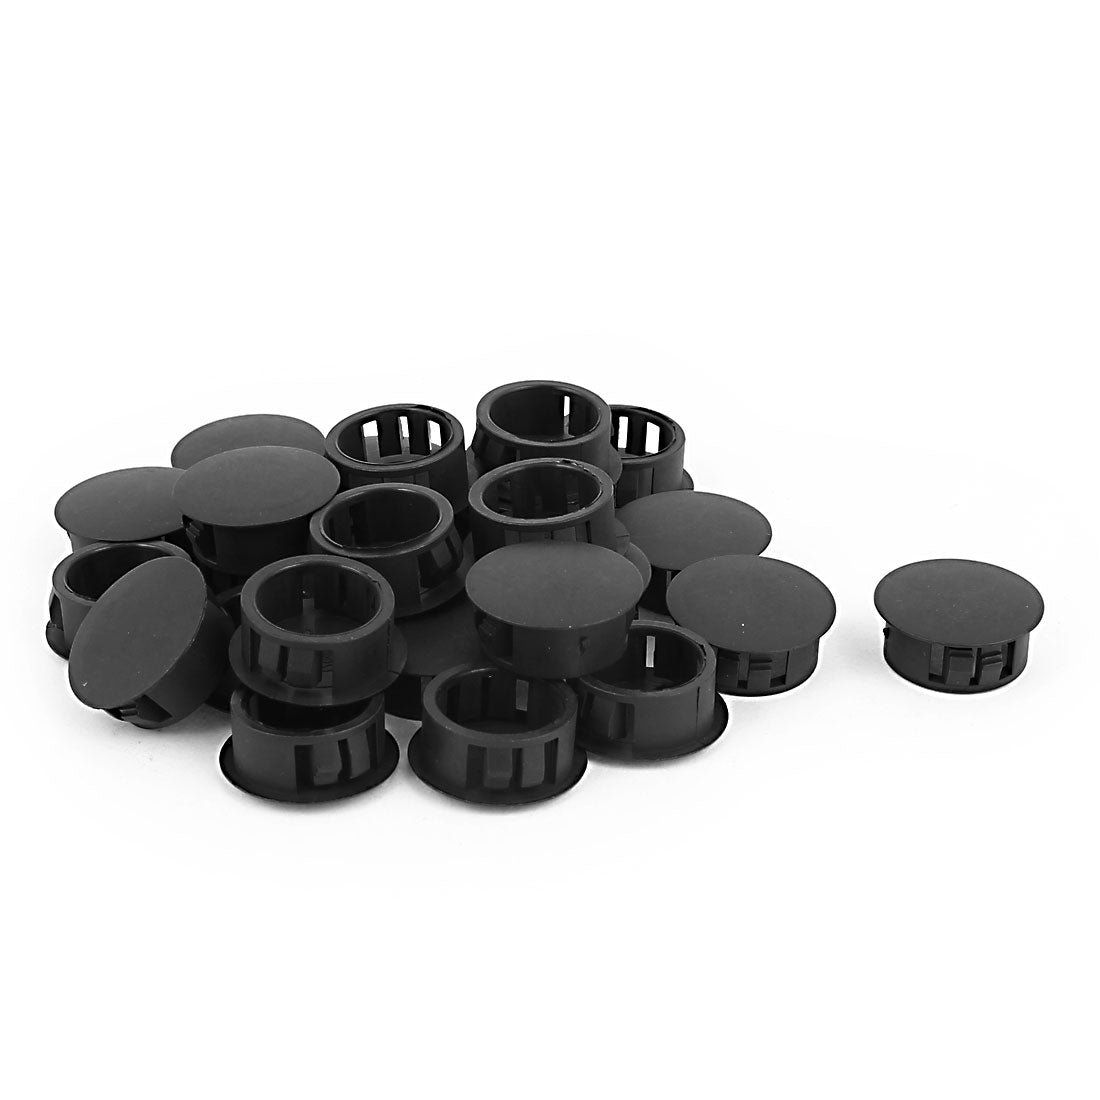 uxcell Uxcell 25pcs Plastic 20mm Dia Snap in Type Locking Hole Connectors Button Cover